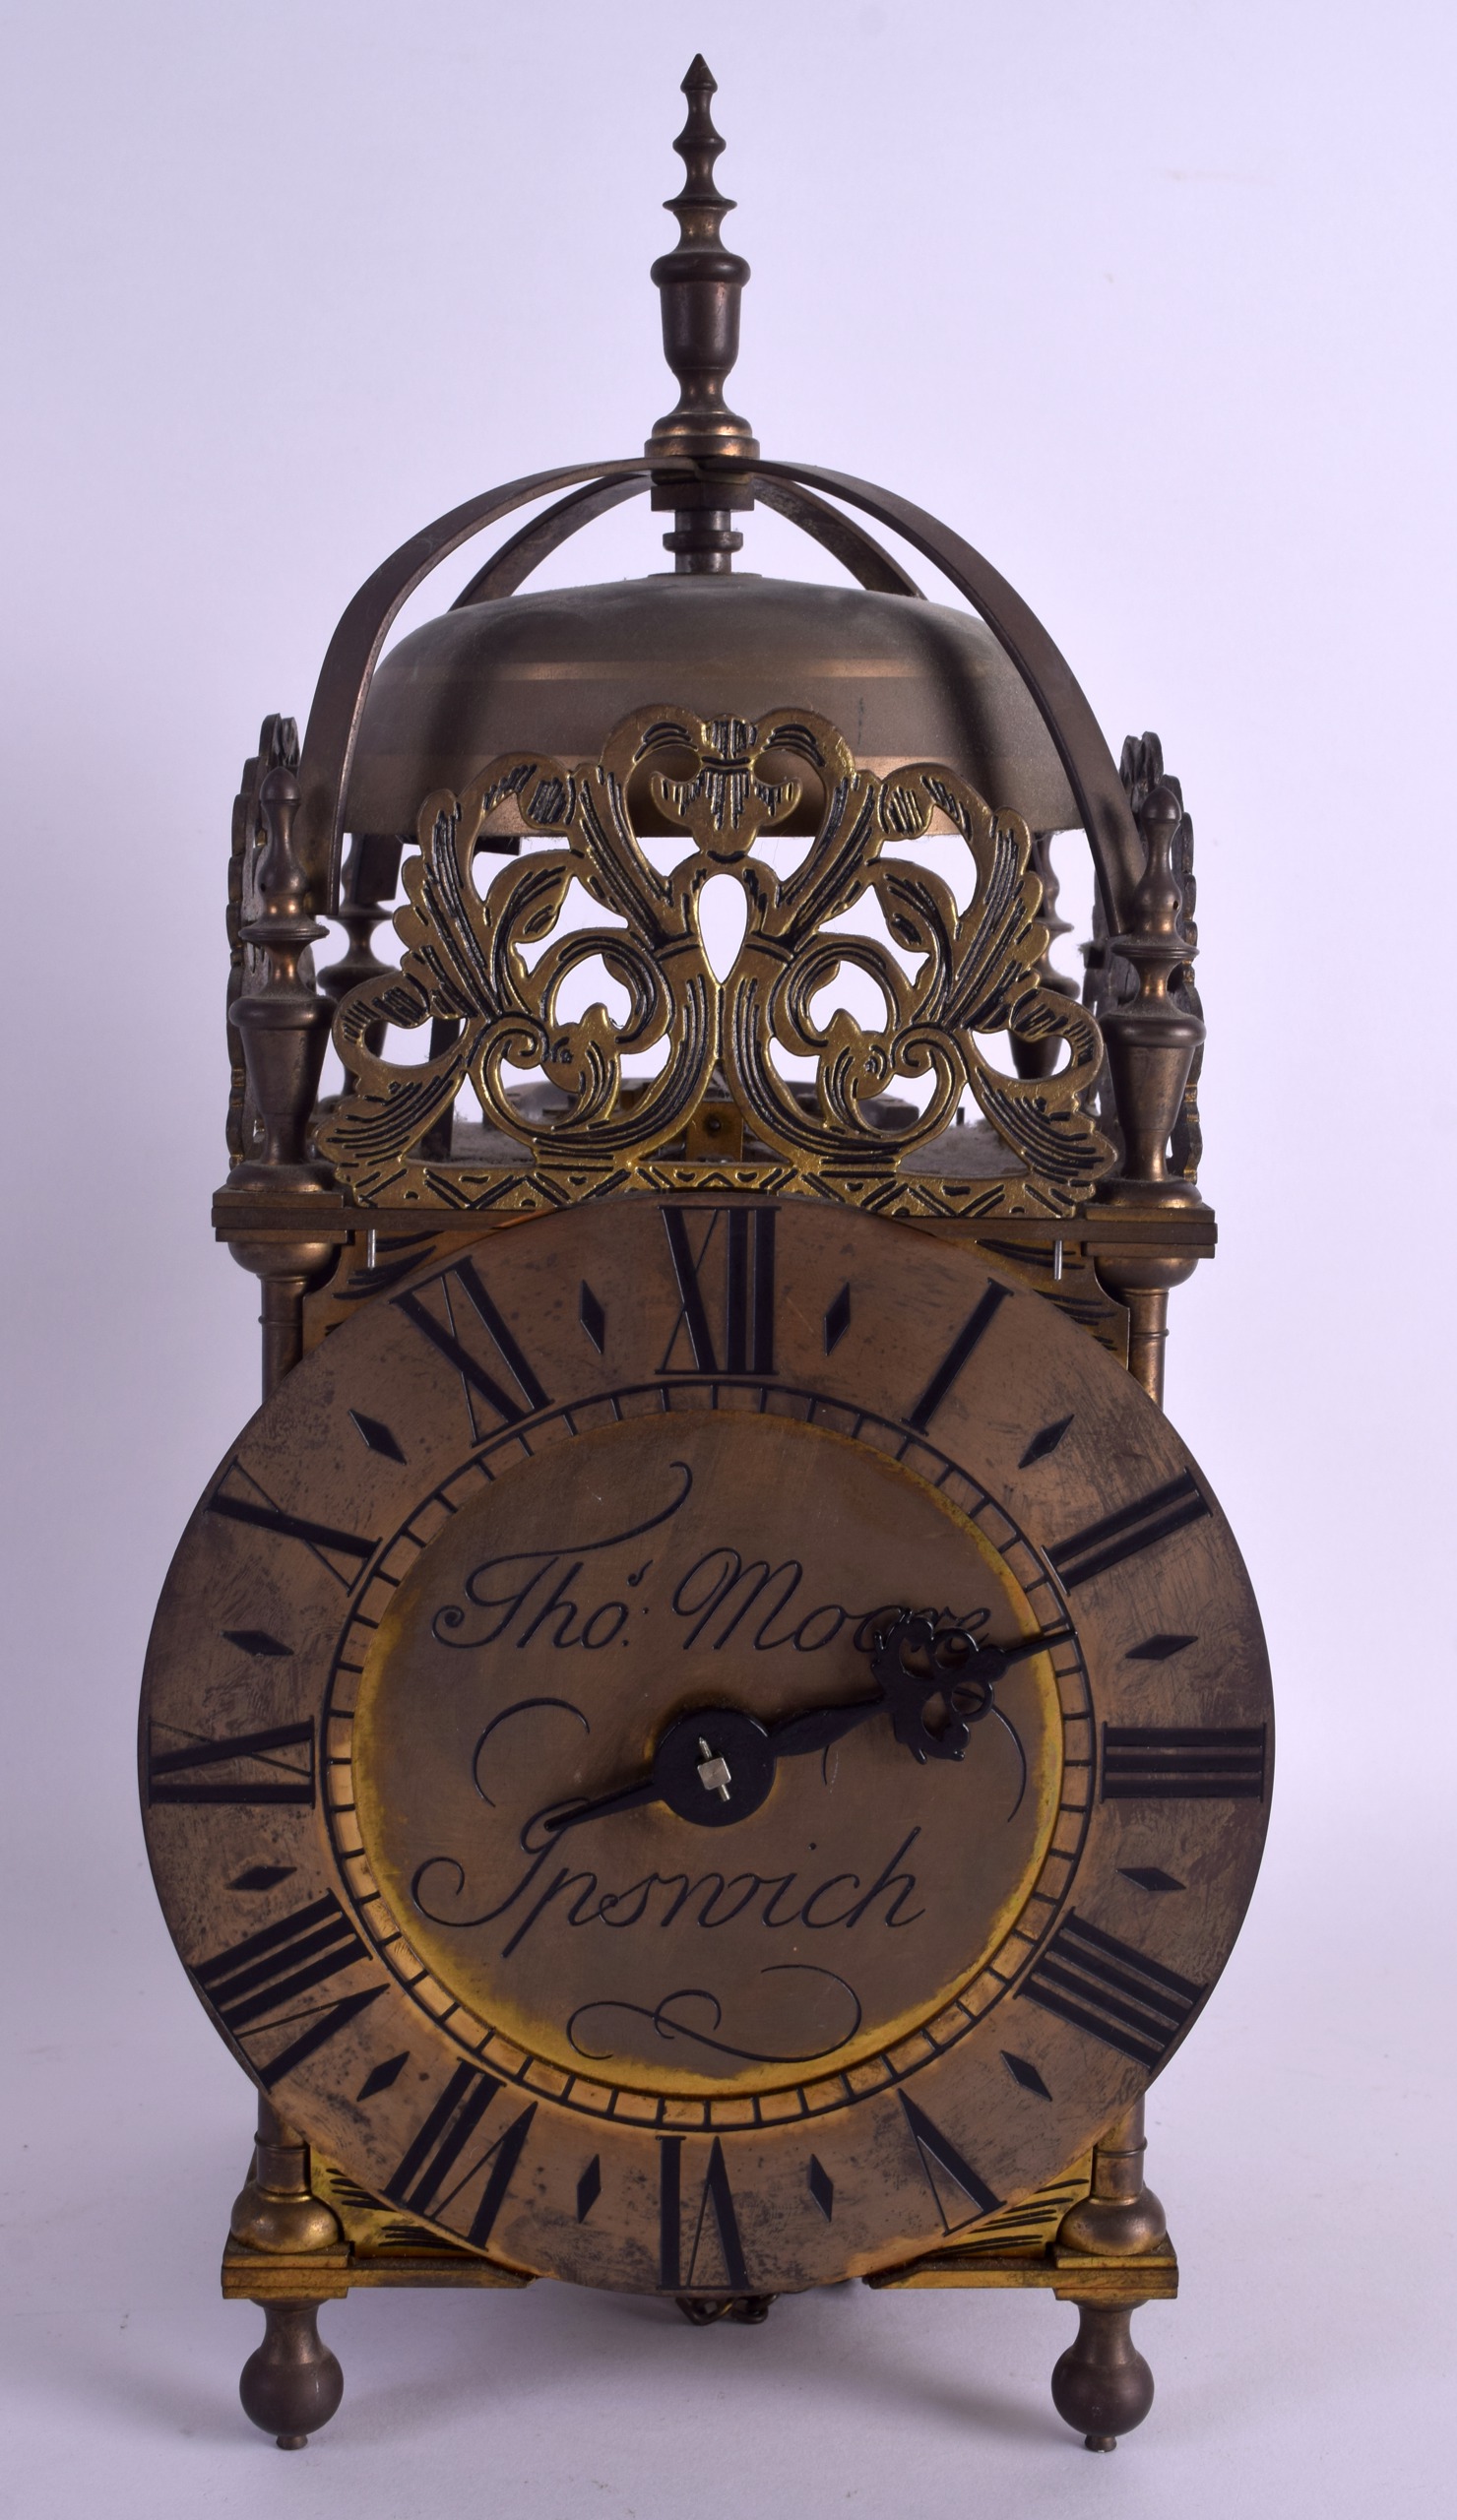 A BRASS LANTERN CLOCK by Thomas Moore of Ipswich, decorated with open work foliage. 37 cm x 15 cm. - Image 2 of 6